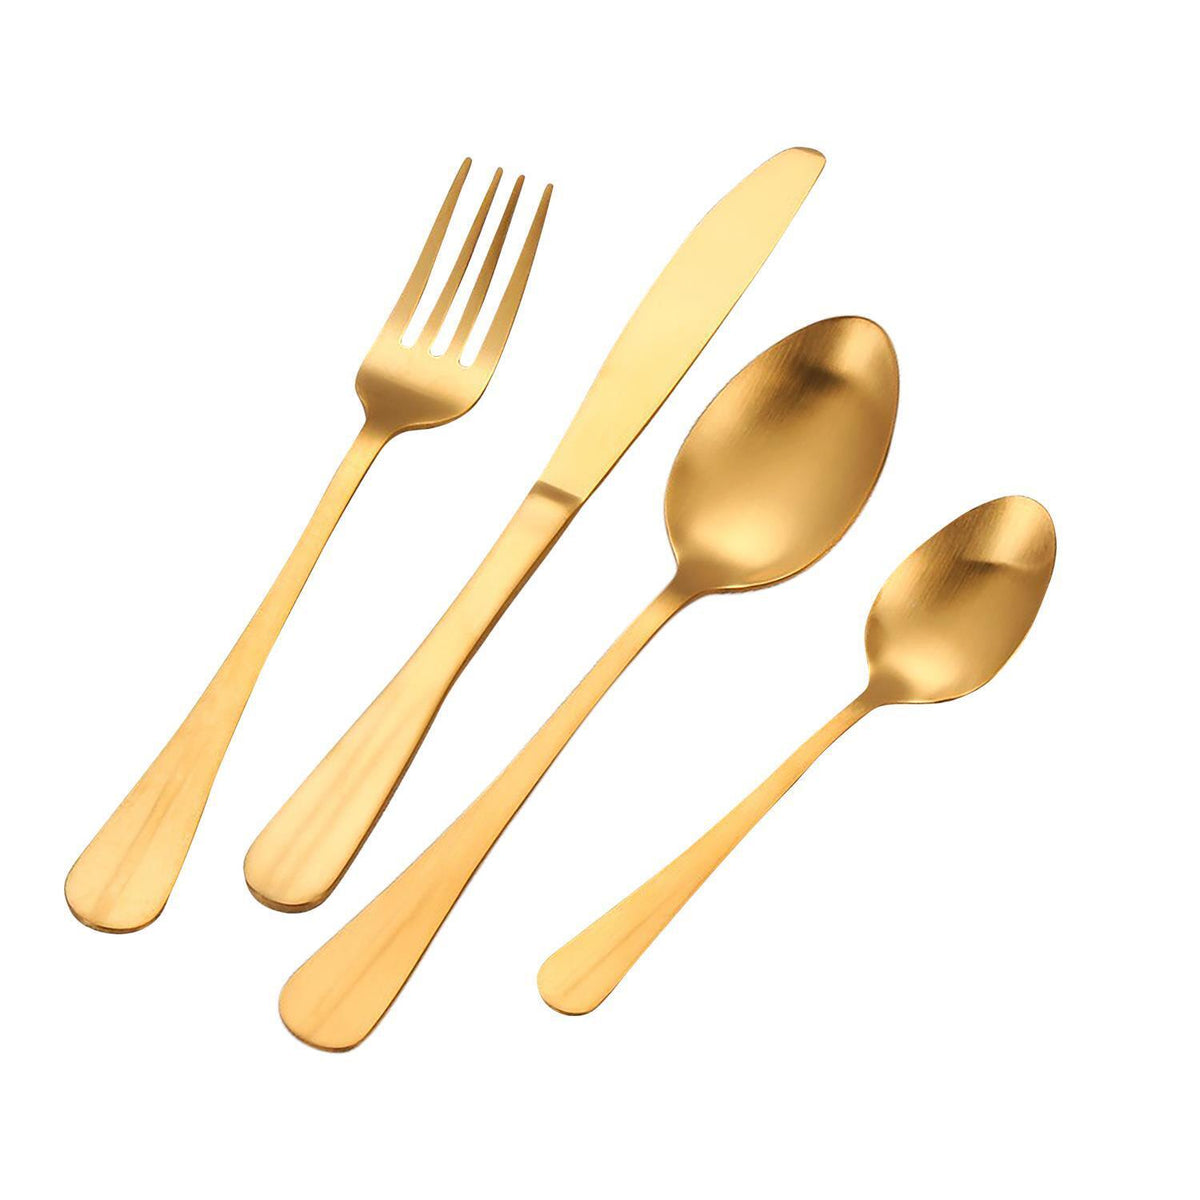 The image shows off the gold plated cutlery set on a white background with one fork, spoon, small spoon and a butter knife